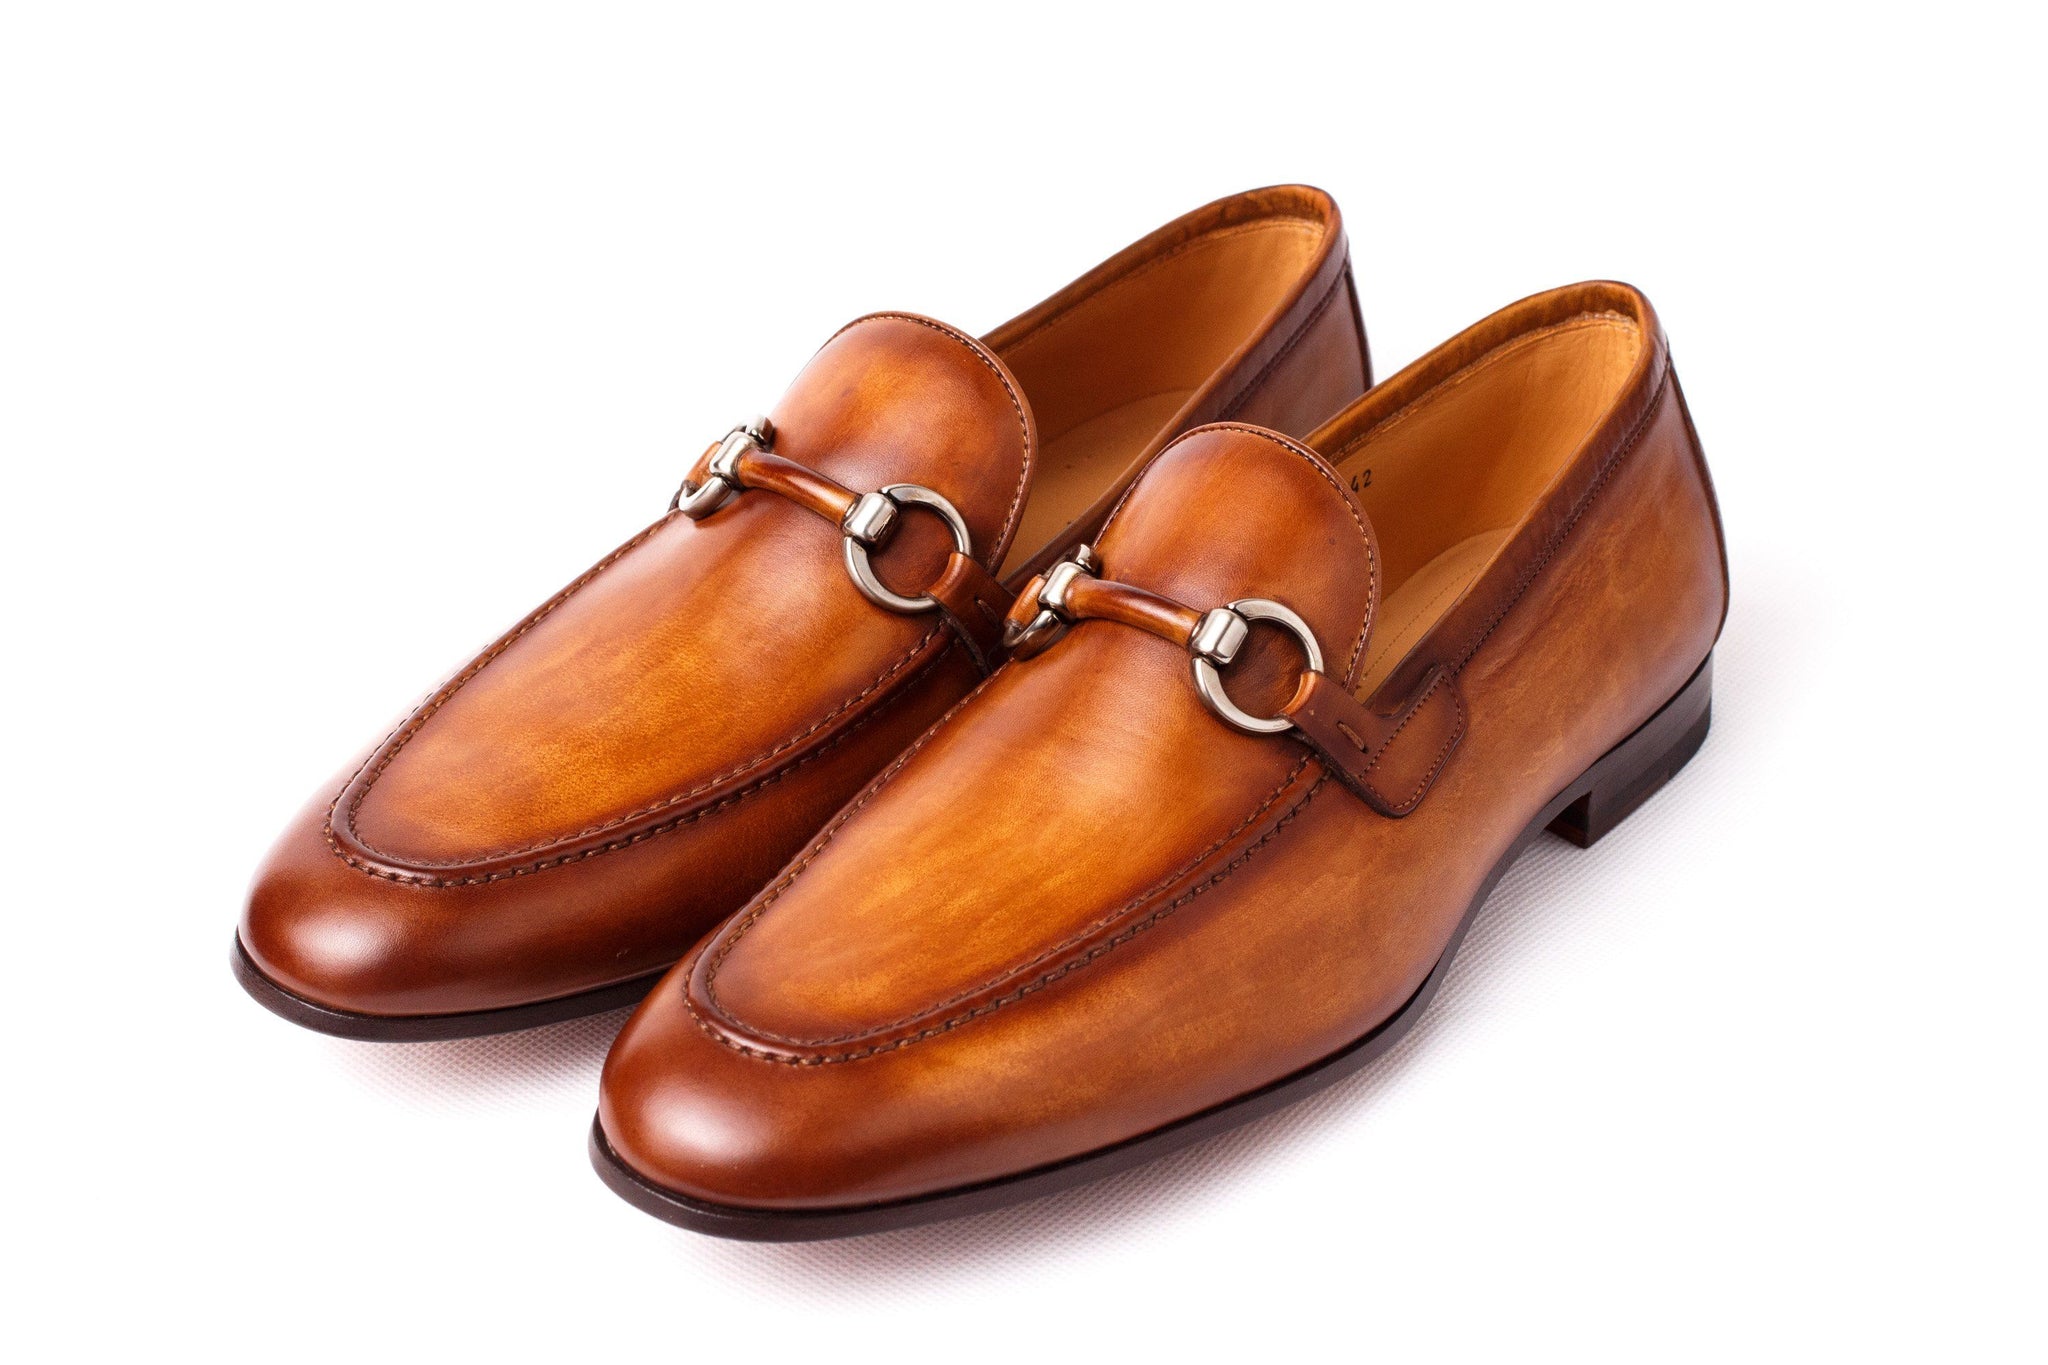 Magnanni - Walter Loafer like Gucci Loafers